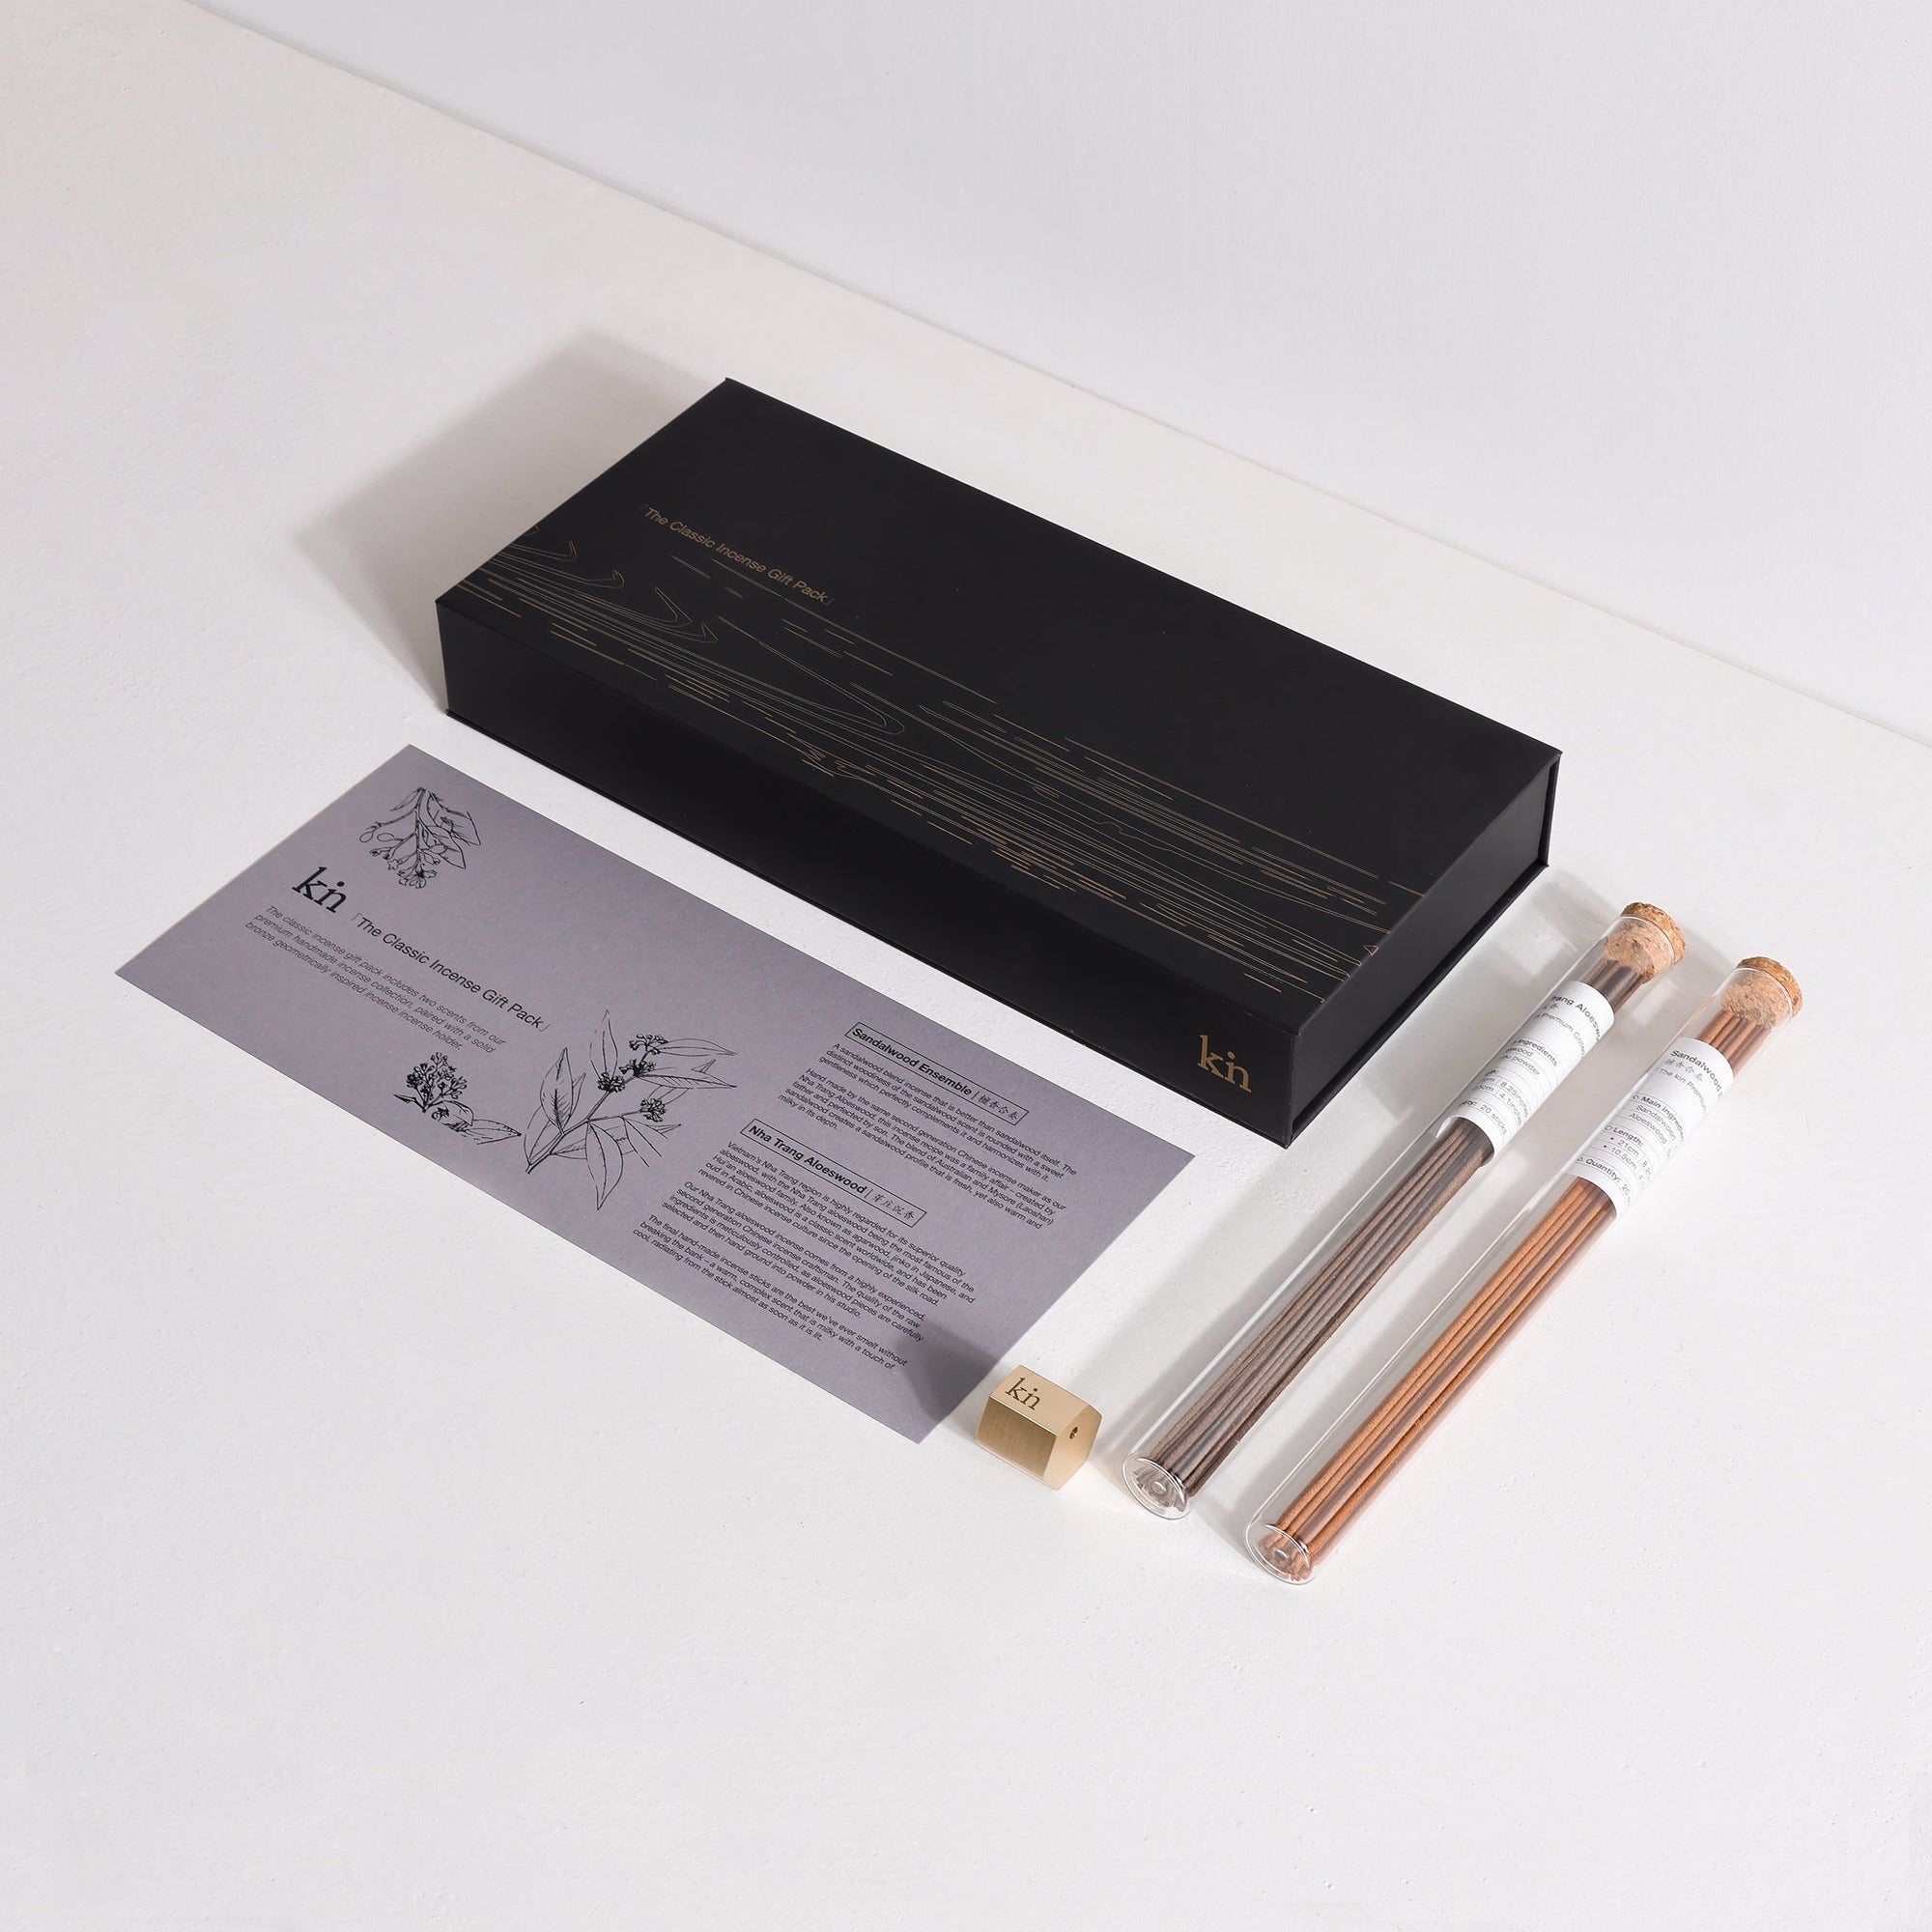 Classic Incense Set by Kin Objects with Handmade Sandalwood and Agarwood Incense Sticks